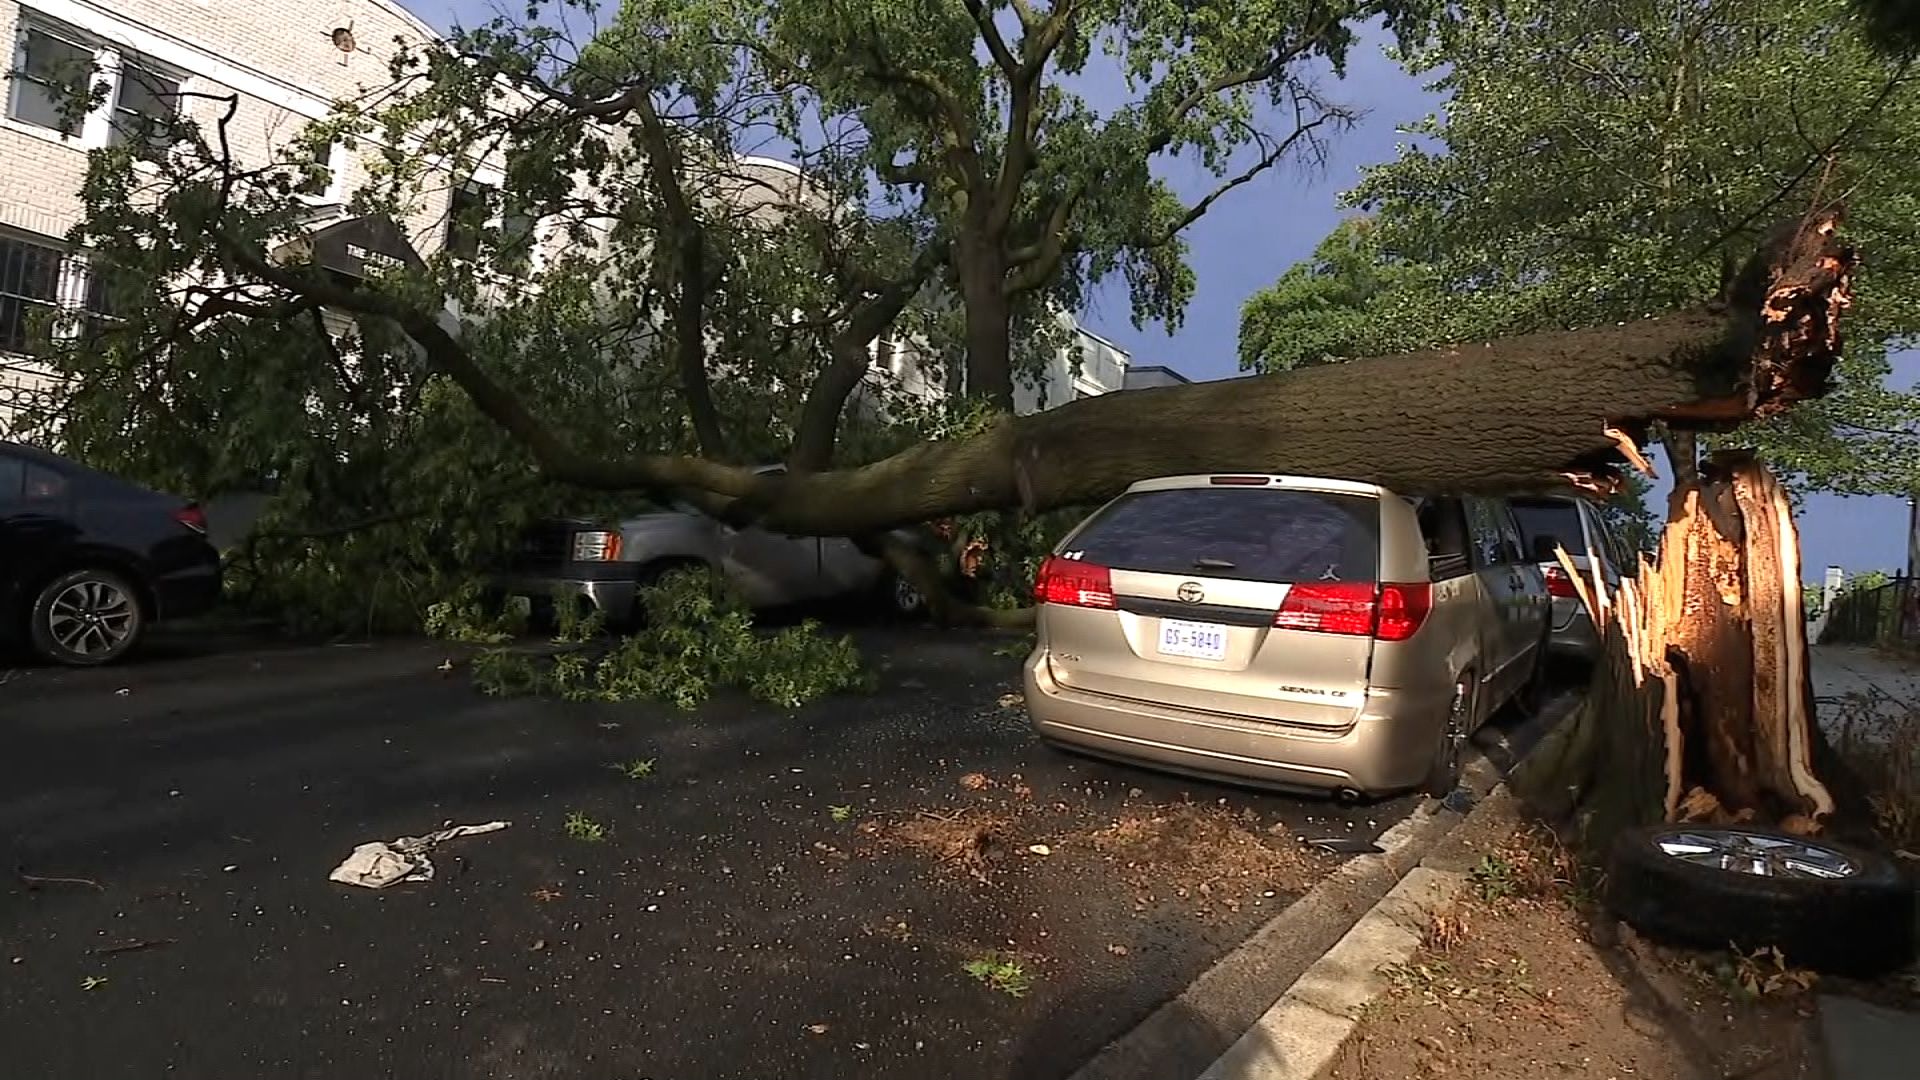 Thunderstorms cause damage in DC area